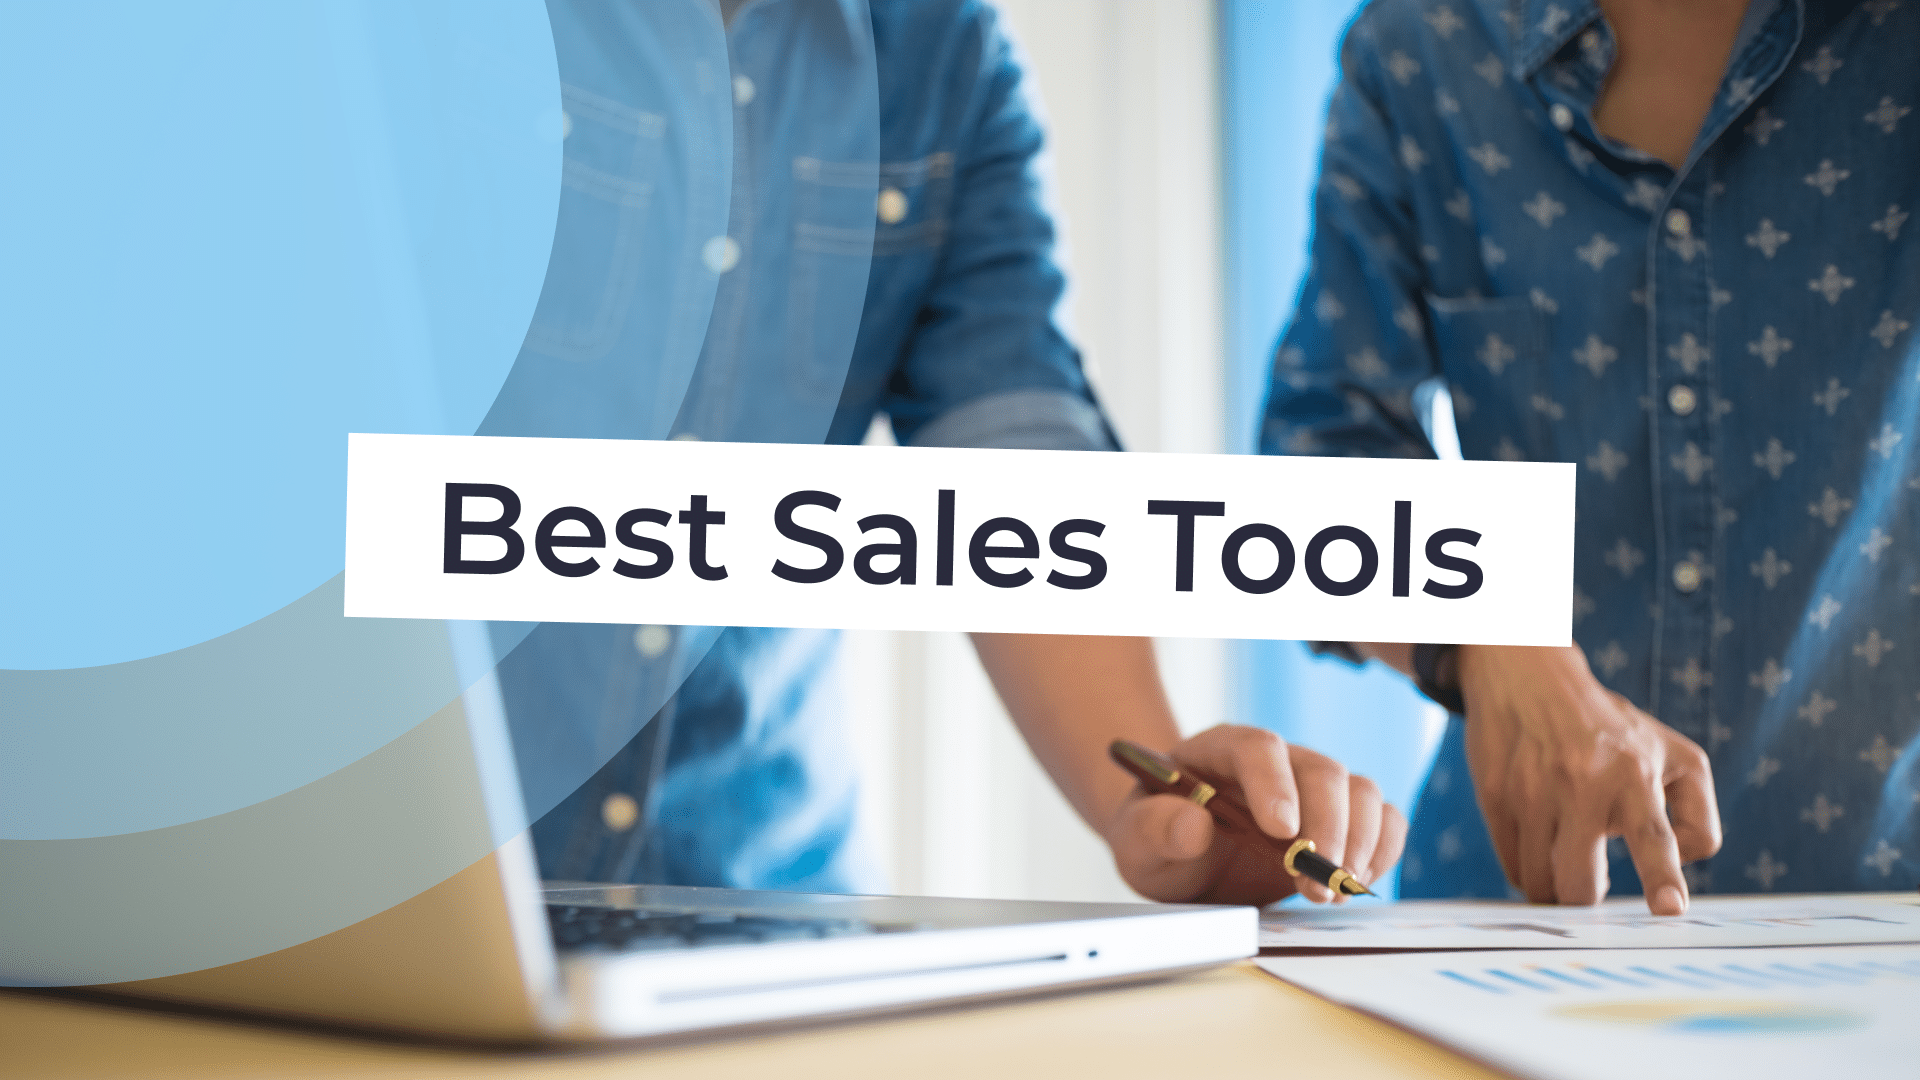 The 20 Best Sales Tools to Fast-track Leads | 2022 List